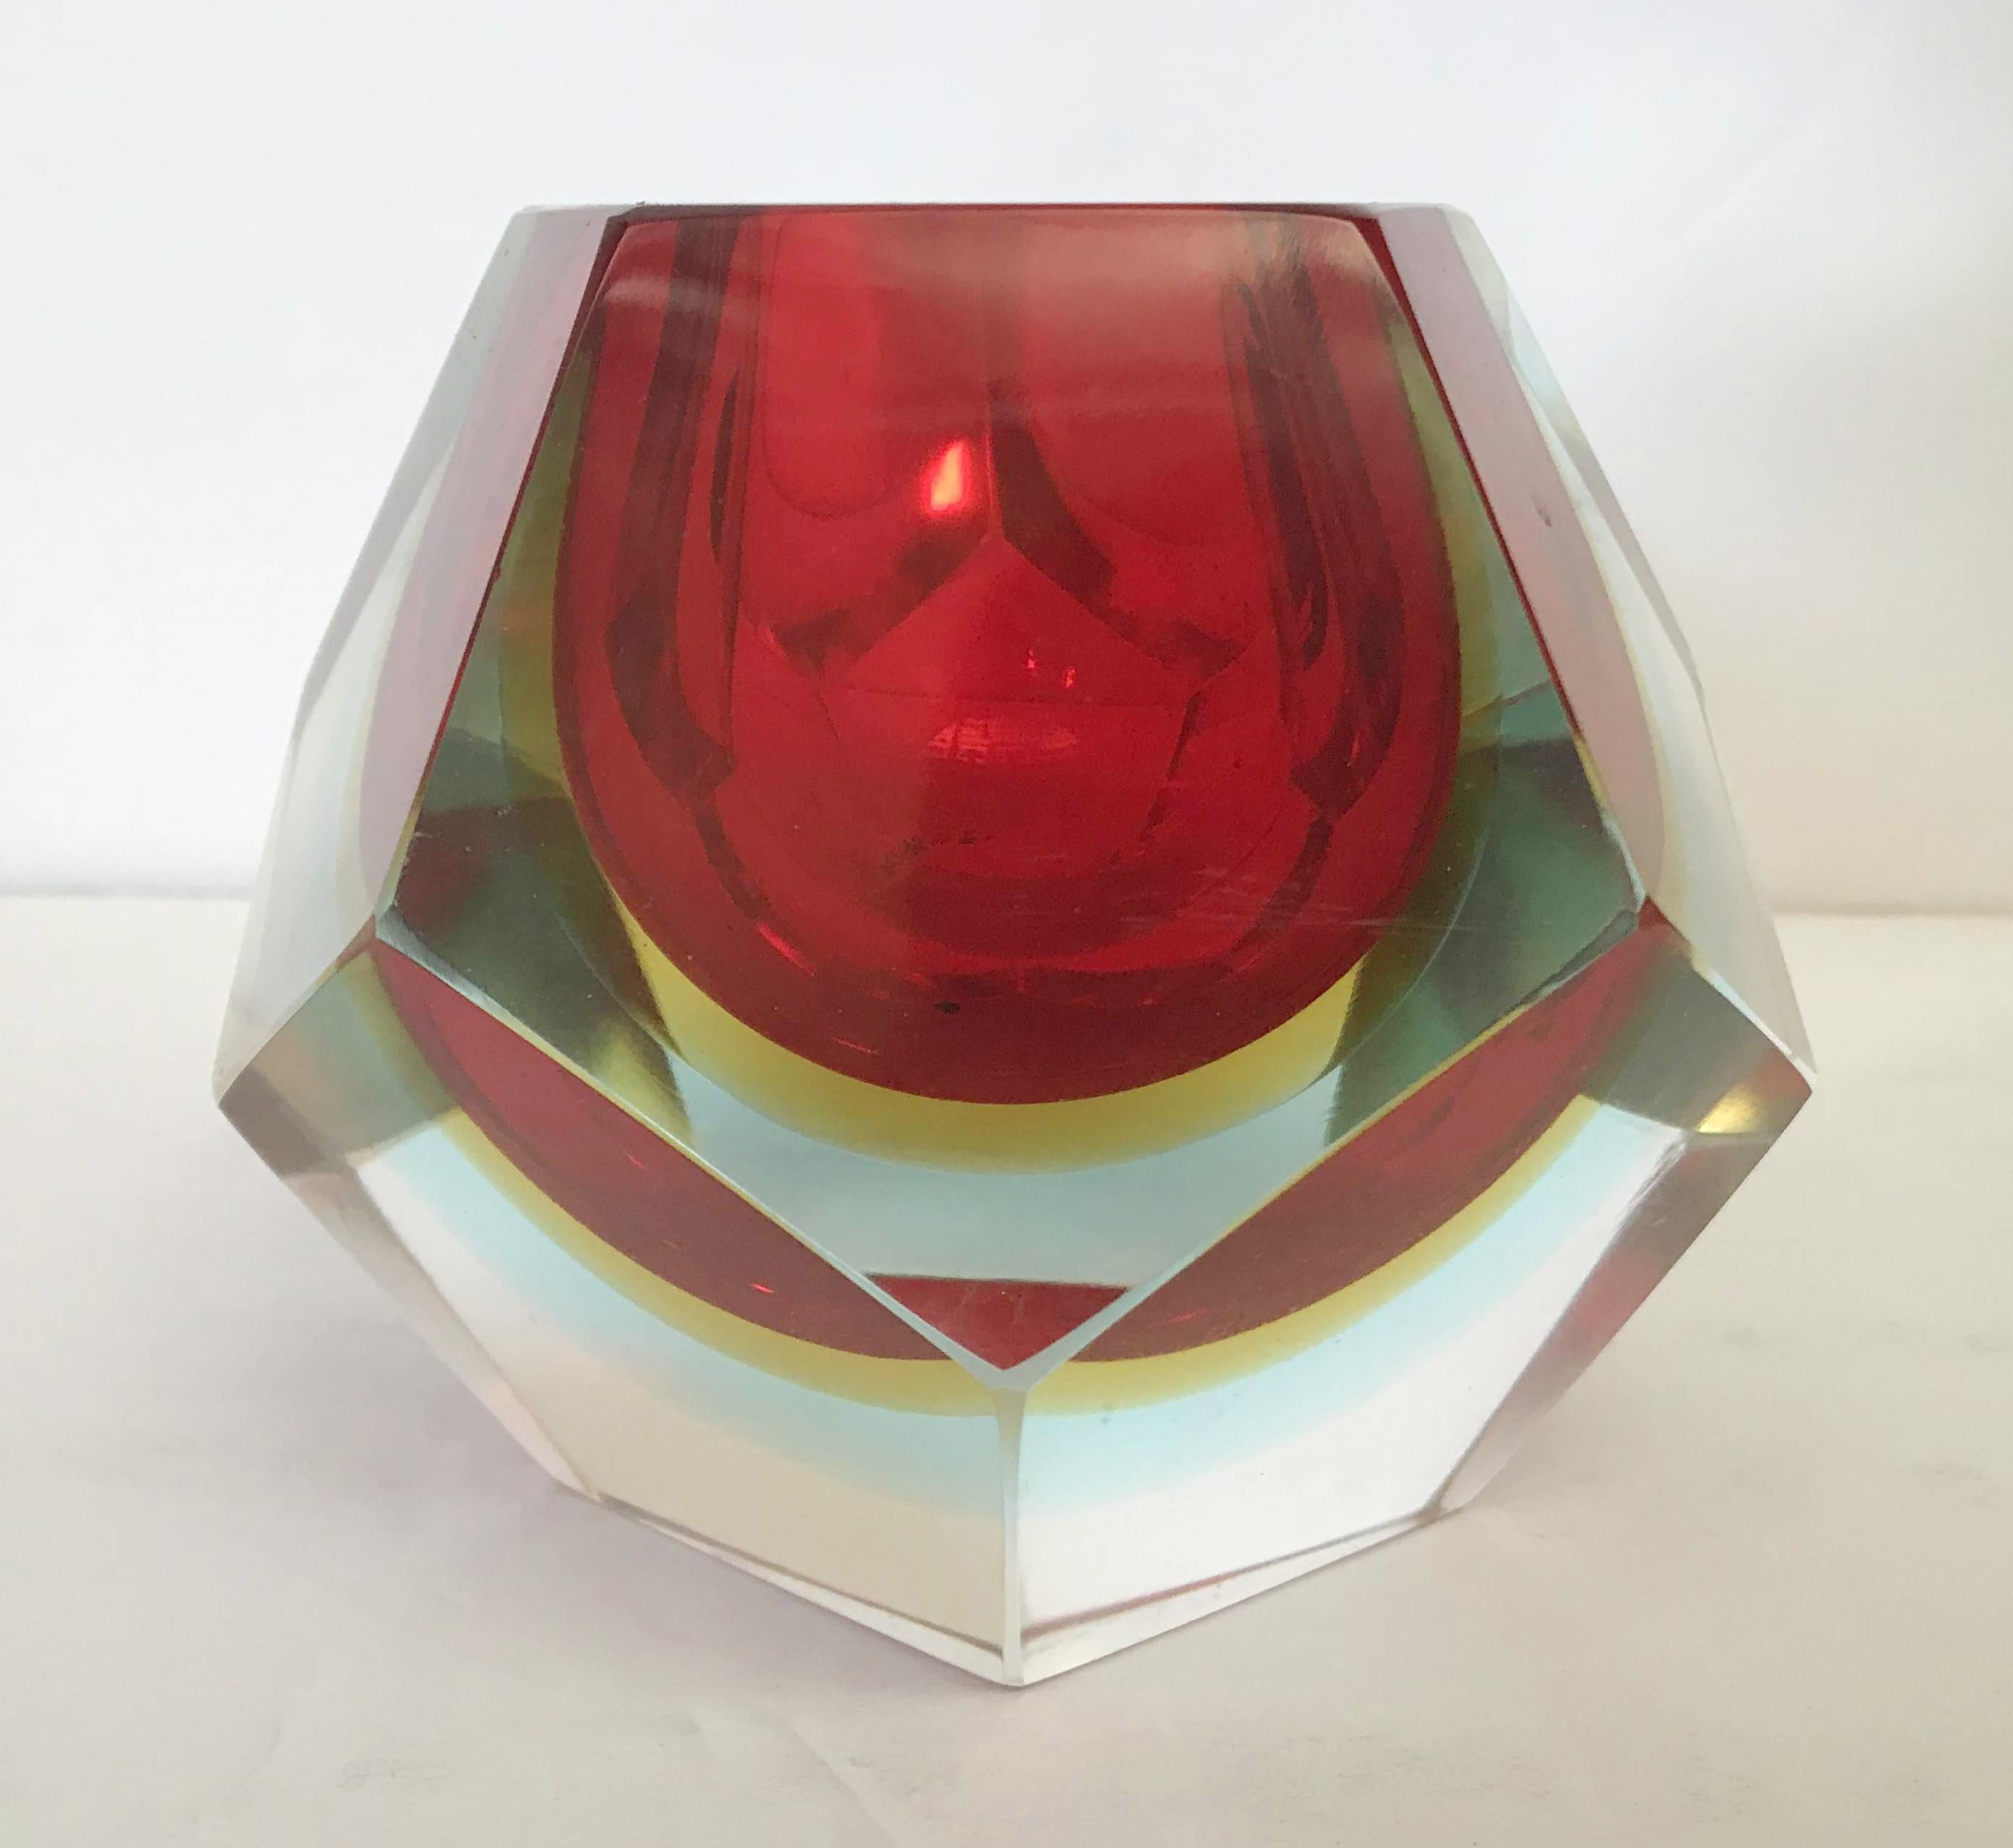 Vintage Italian red faceted Murano glass bowl blown in Sommerso technique / designed by Mandruzzato, circa 1960s / Made in Italy
Measures: Diameter 5.5 inches, height 4.5 inches
* Please note the minor chip on the edge of the bowl, shown in the last